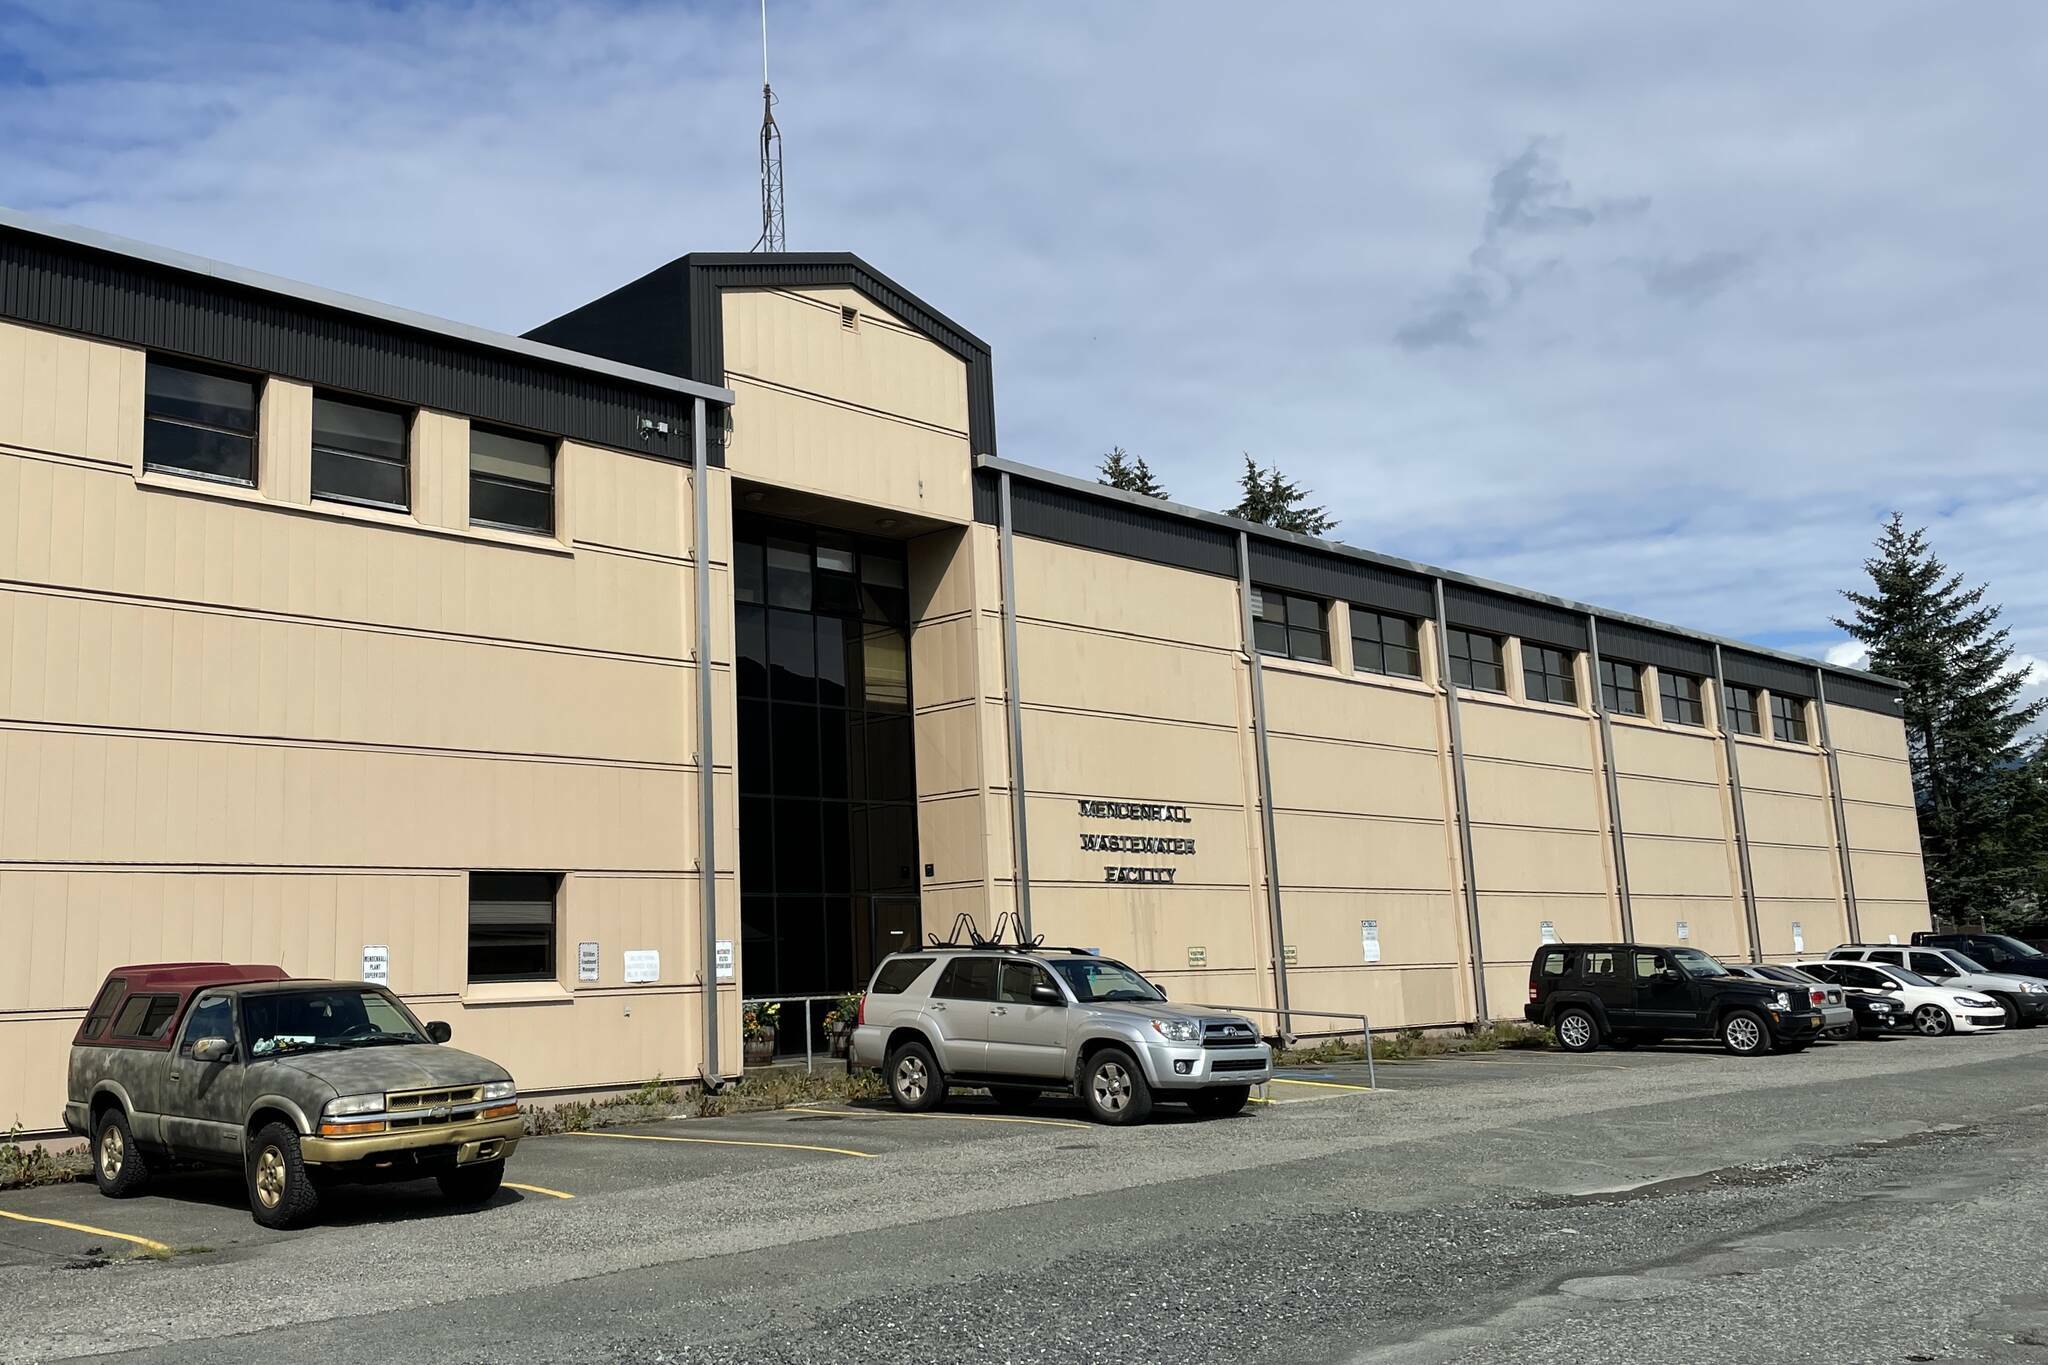 An acid spill and a diesel spill of significant size were detected Wednesday at the Mendenhall Wastewater Treatment Plant, according to officials. A spill of a still-unknown toxic substance was also detected the same day at the Auke Bay treatment plant. (Juneau Empire file photo)